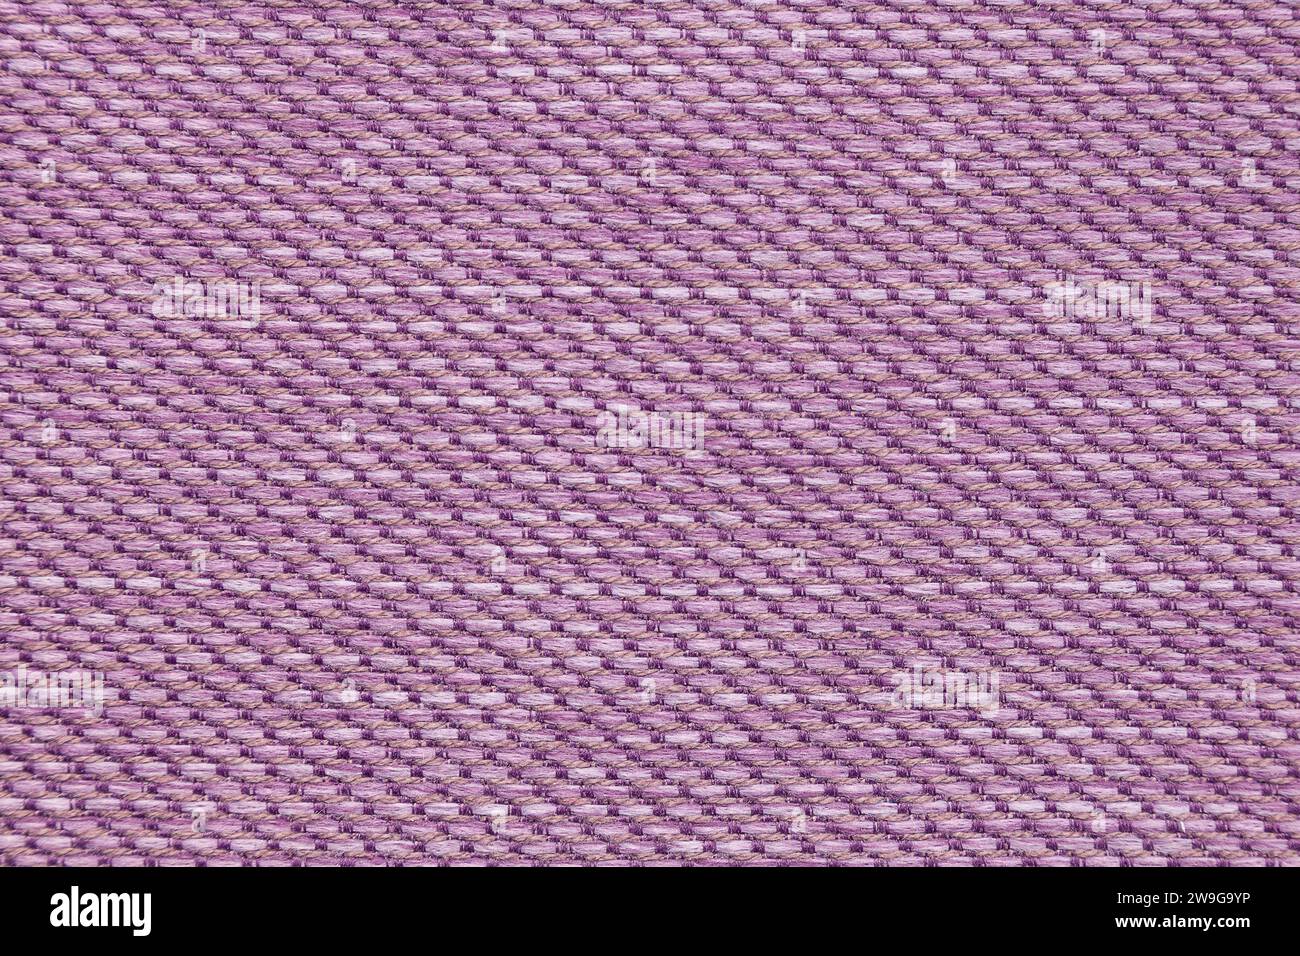 Texture of fabric for upholstered furniture in lilac color. Stock Photo